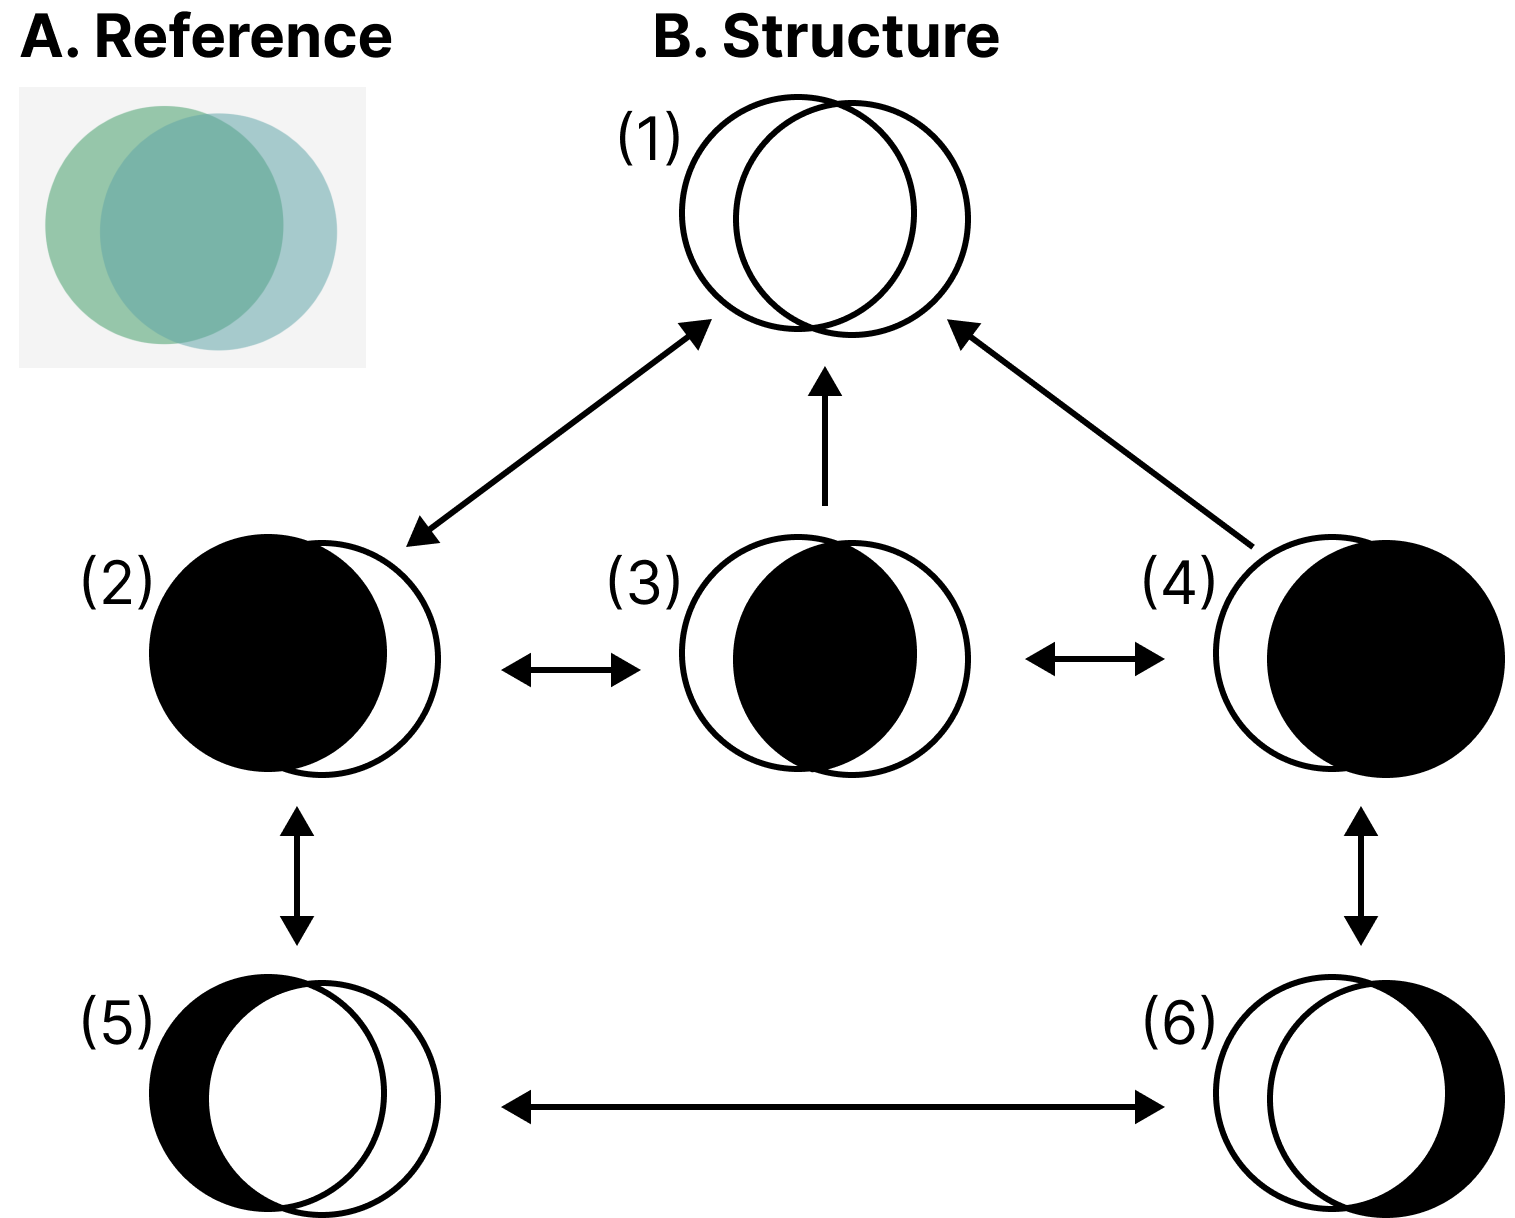 A. Reference, a color diagram of two sets that intersect. The sets are shown as perfect circles. B Structure, a 6 part break down of the navigable structure. Each node is shown as a traced subportion used to render to the braille display. Walkthrough: 1 is both sets, 2 is the left set, 3 is the intersection of the two sets, 4 is the right set, 5 is the subset of the left set that is excluded from the right set, and 6 is the subset of the right set that is excluded from the left set.